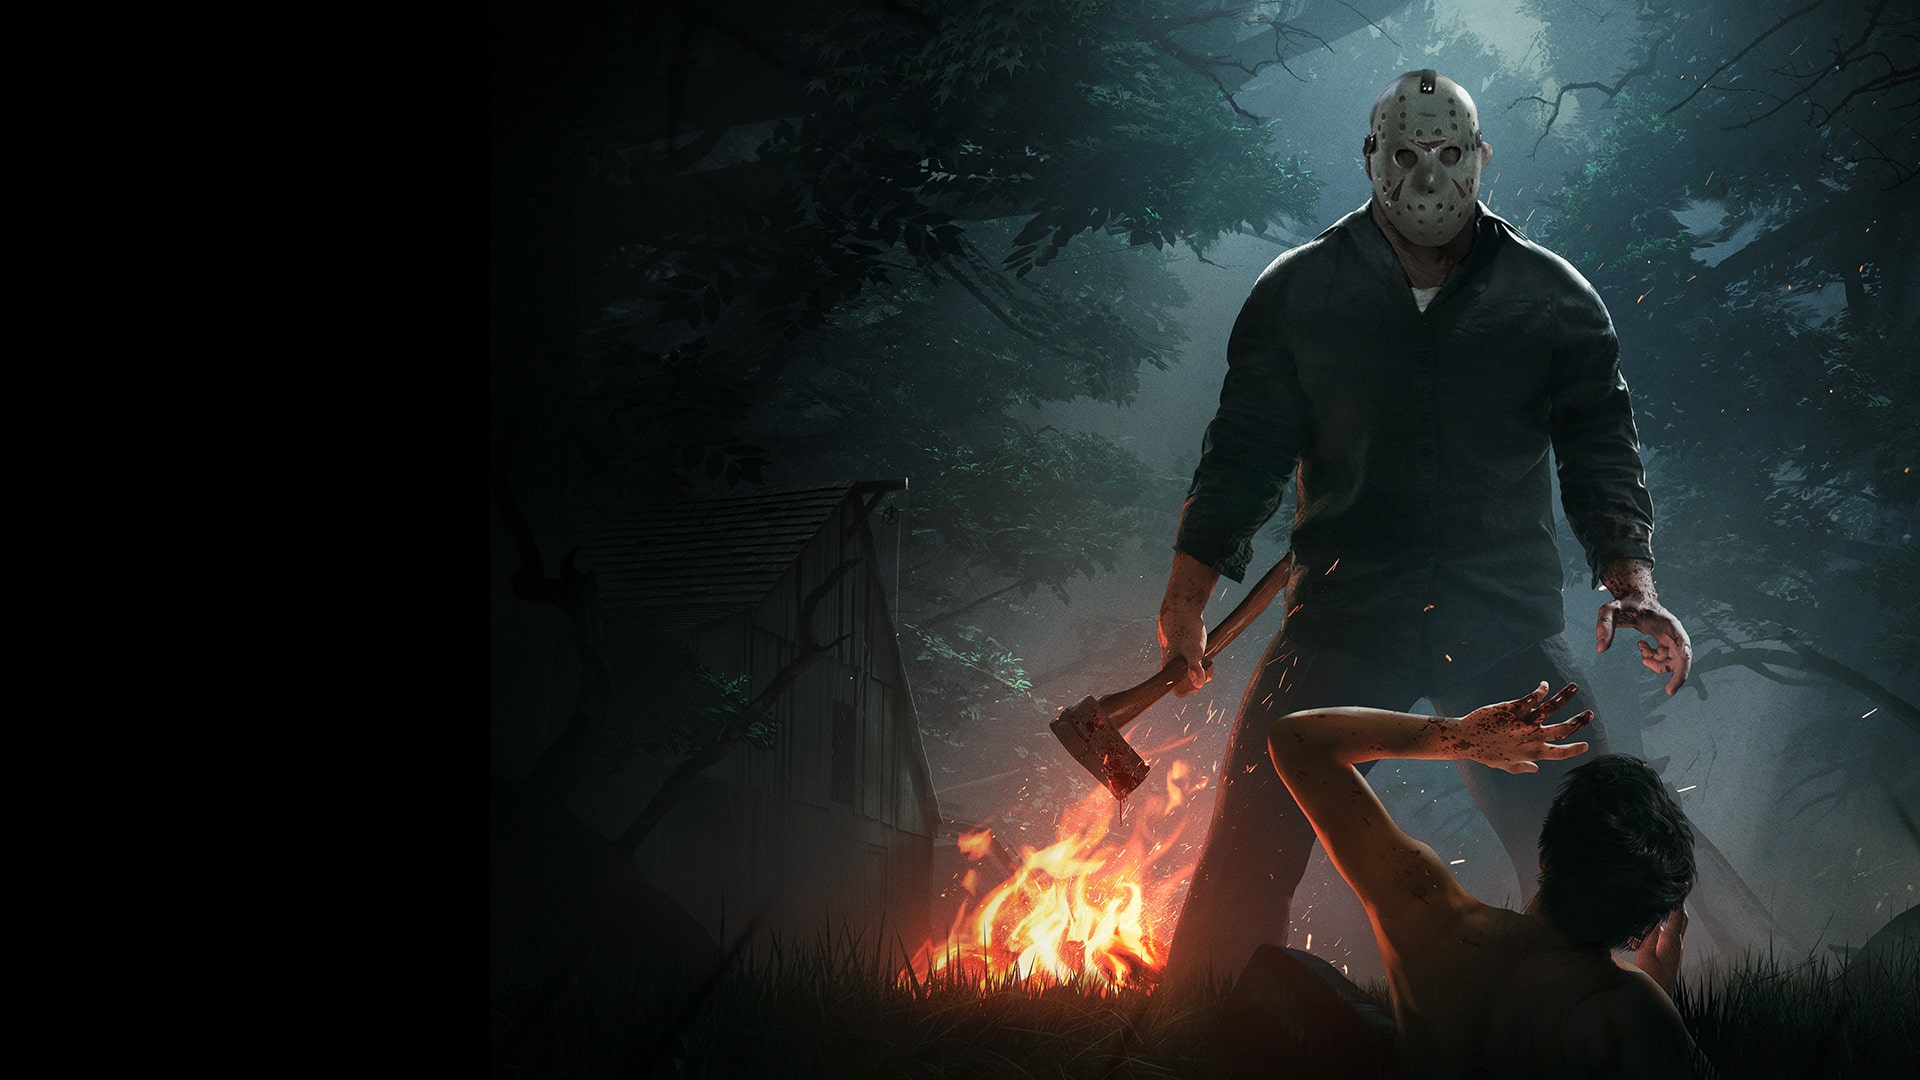 Friday The 13th: U&I ENTERTAINMENT, The Game for PlayStation 4 